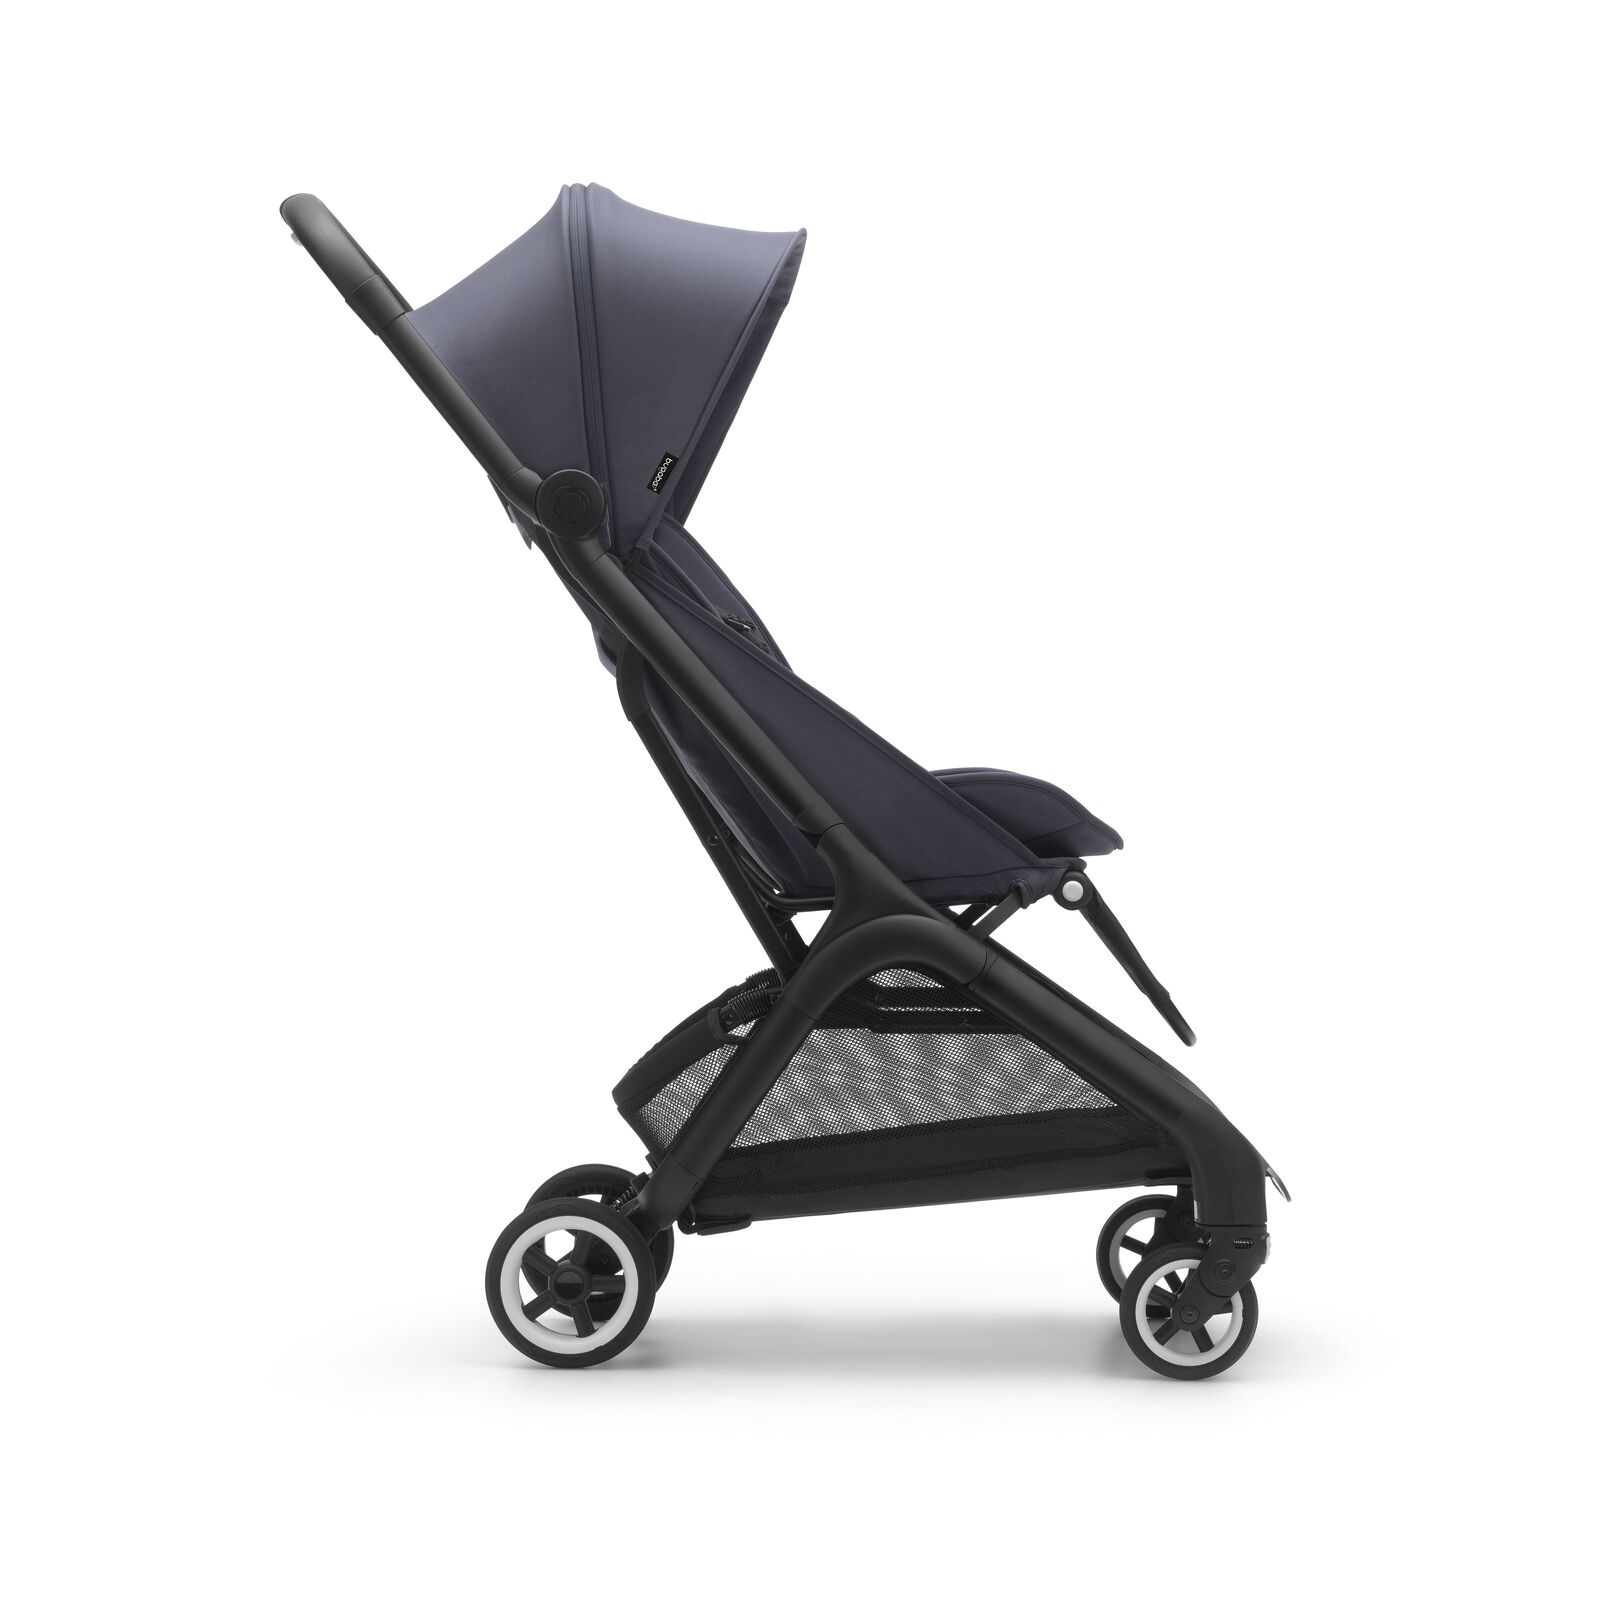 PP Bugaboo Butterfly complete BLACK/STORMY BLUE - STORMY BLUE